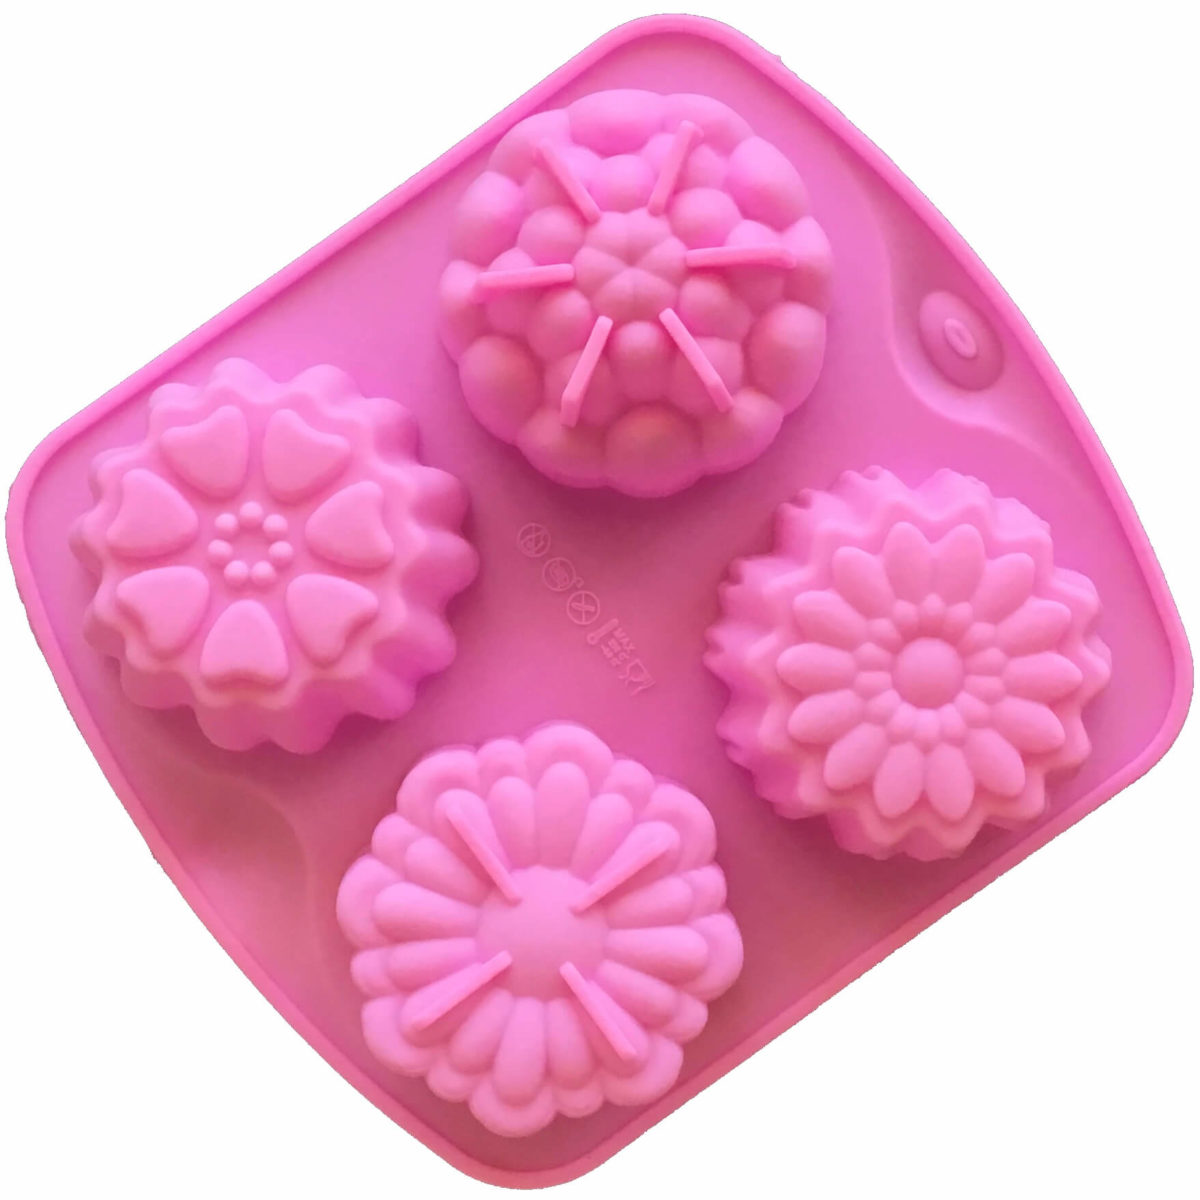 pink four cavity silicone mould with four individual floral designs